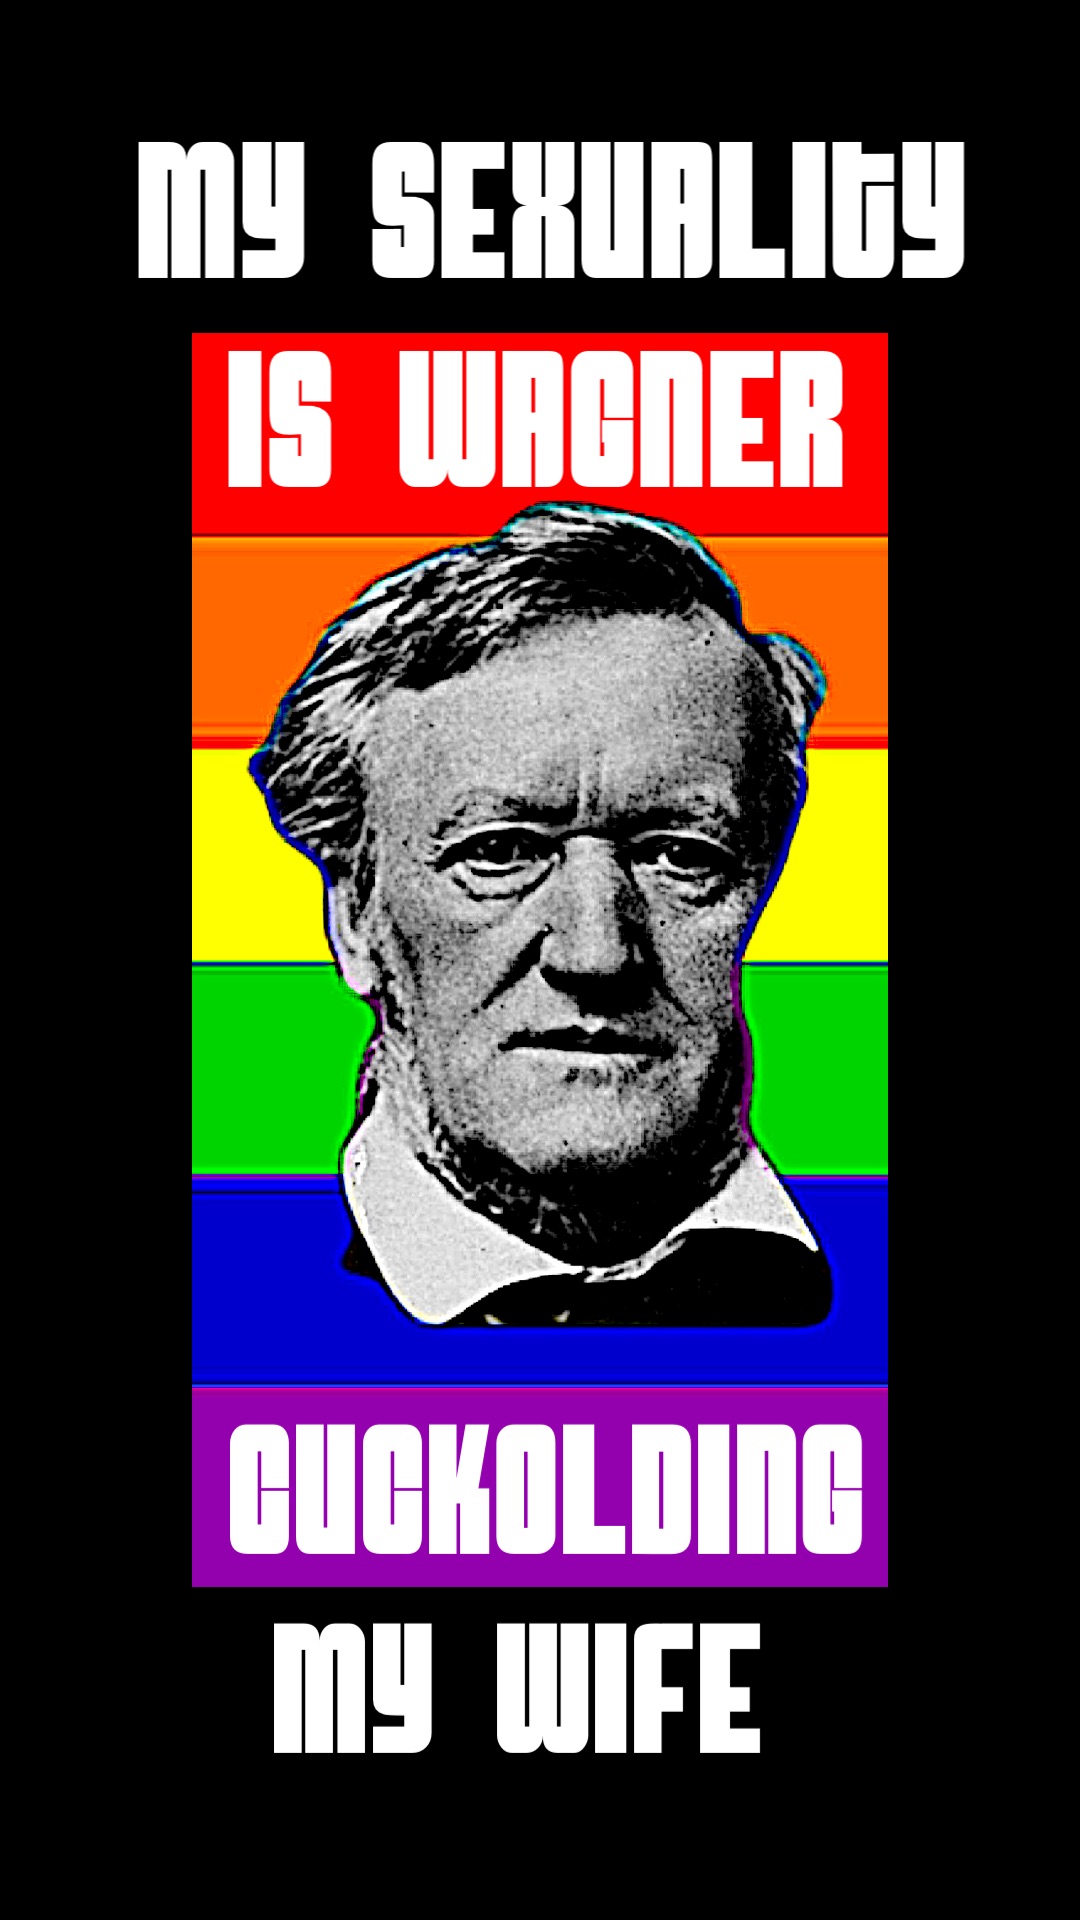 My Sexuality is Wagner cuckolding 
my wife